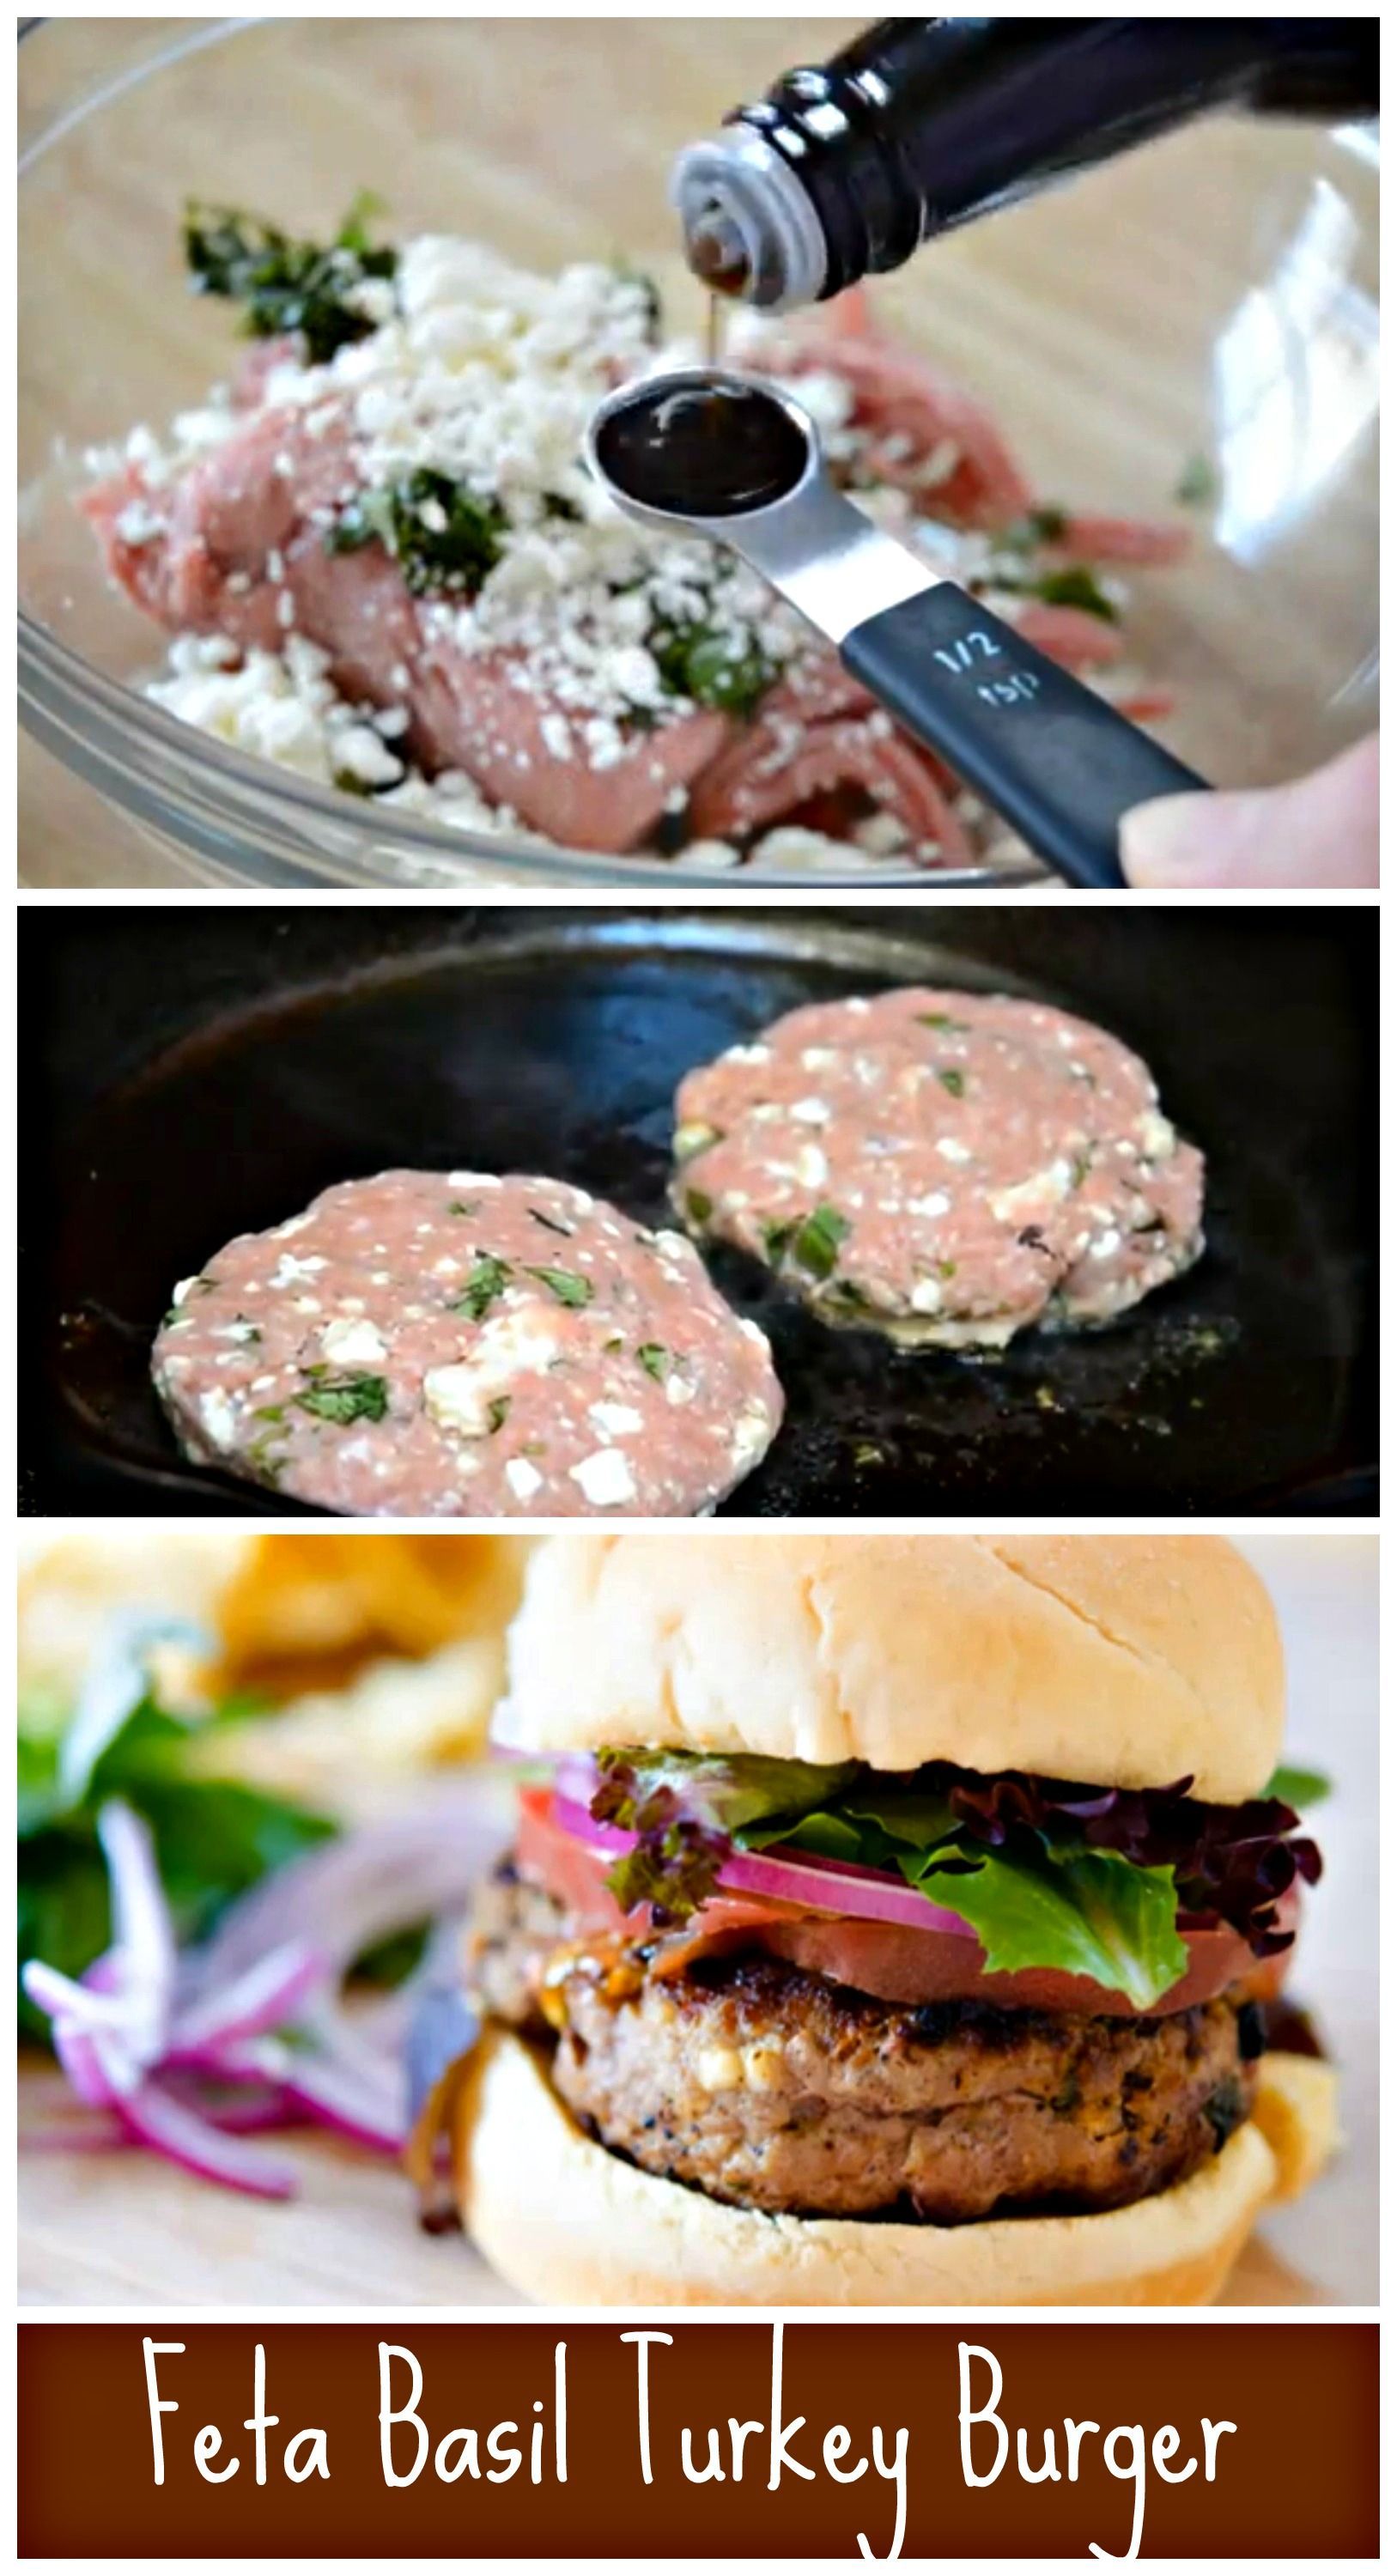 Mix ground turkey with a few fun flavors and throw it on the grill or in a skill